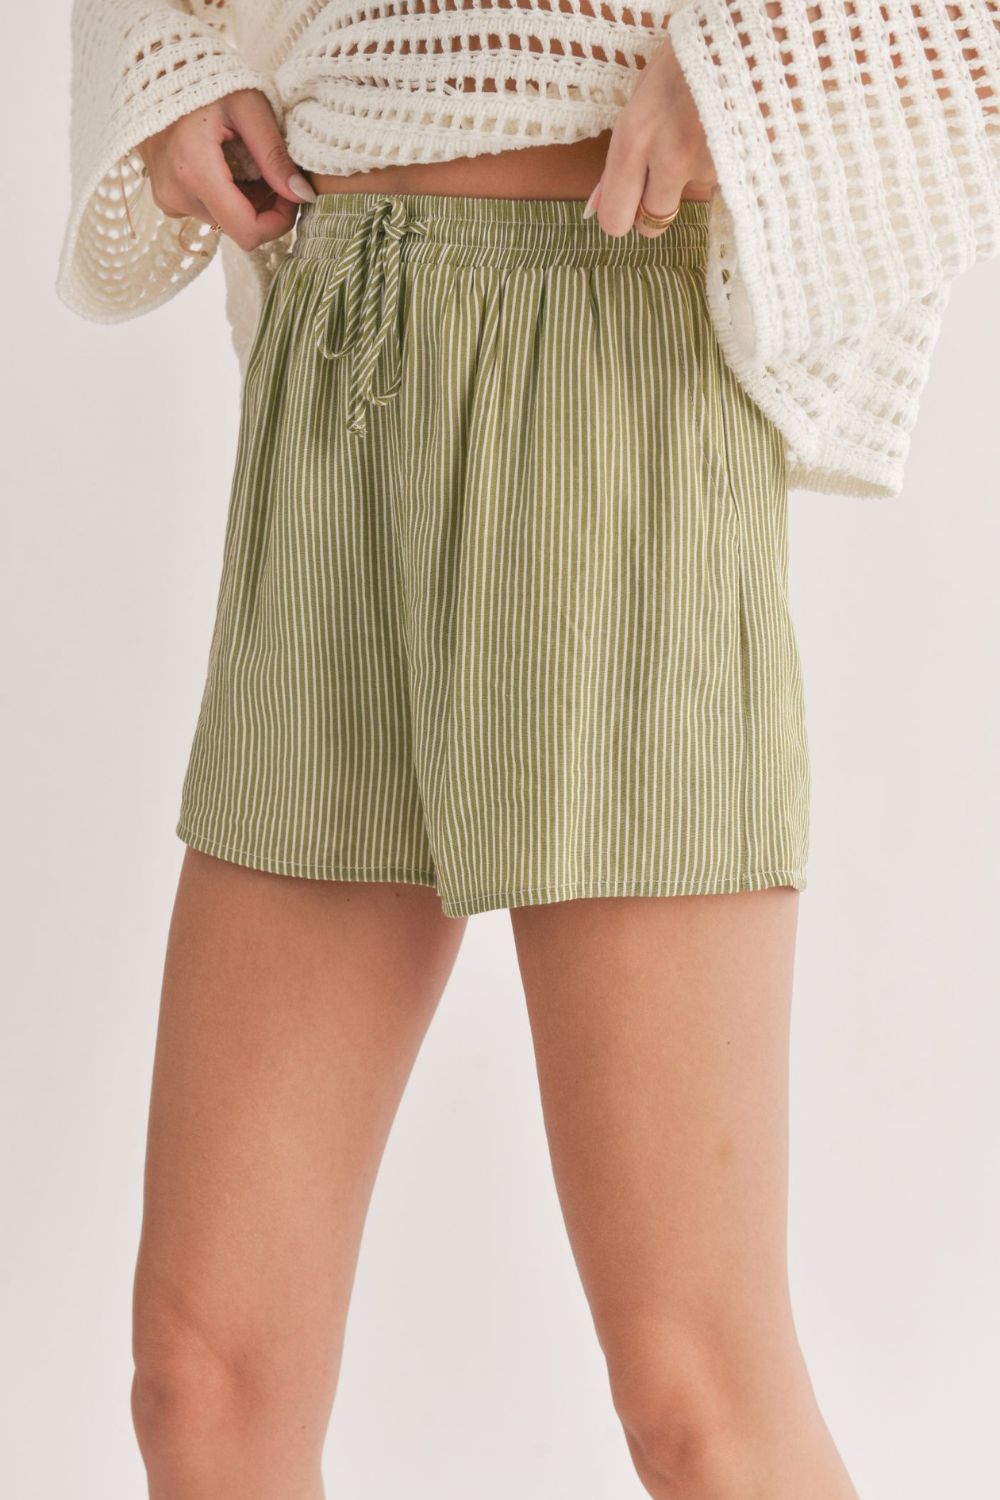 Women&#39;s Oasis Striped Shorts | Green Multi - Women&#39;s Shorts - Blooming Daily